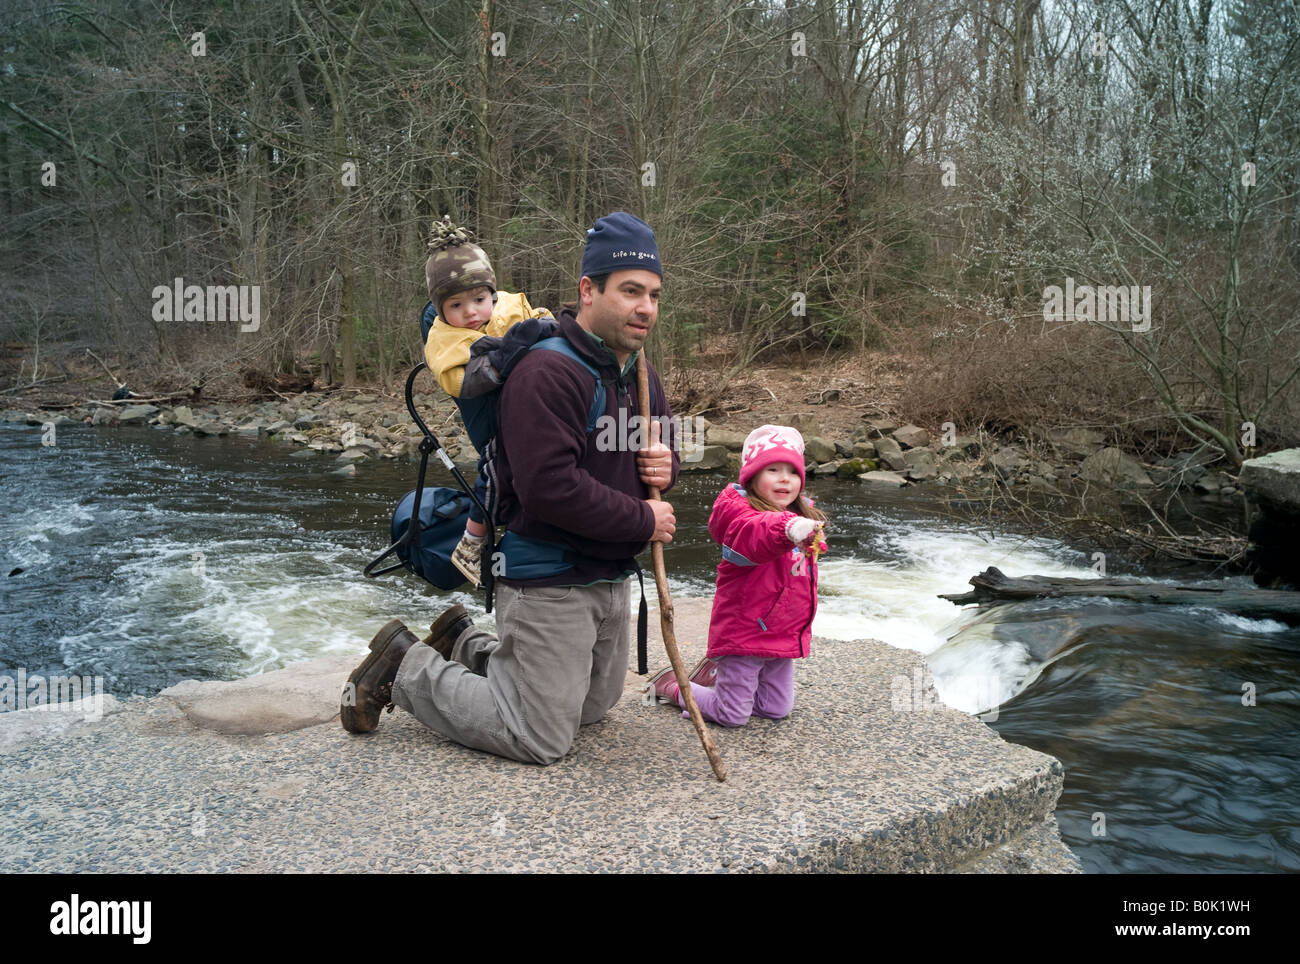 A Man hiking with his two small children near a river in the forest Stock Photo